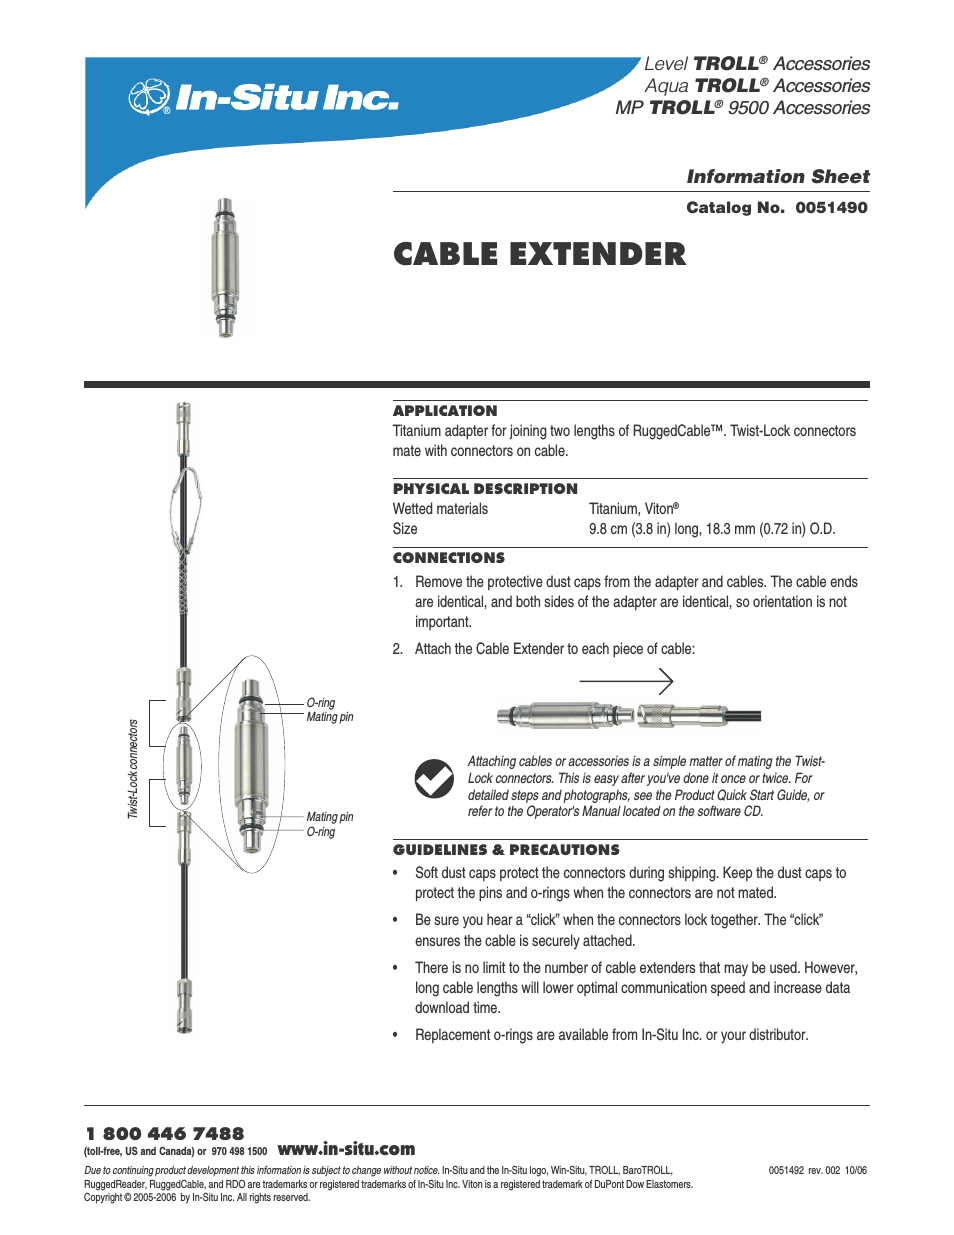 Cable Extender for Use with RuggedCable Systems